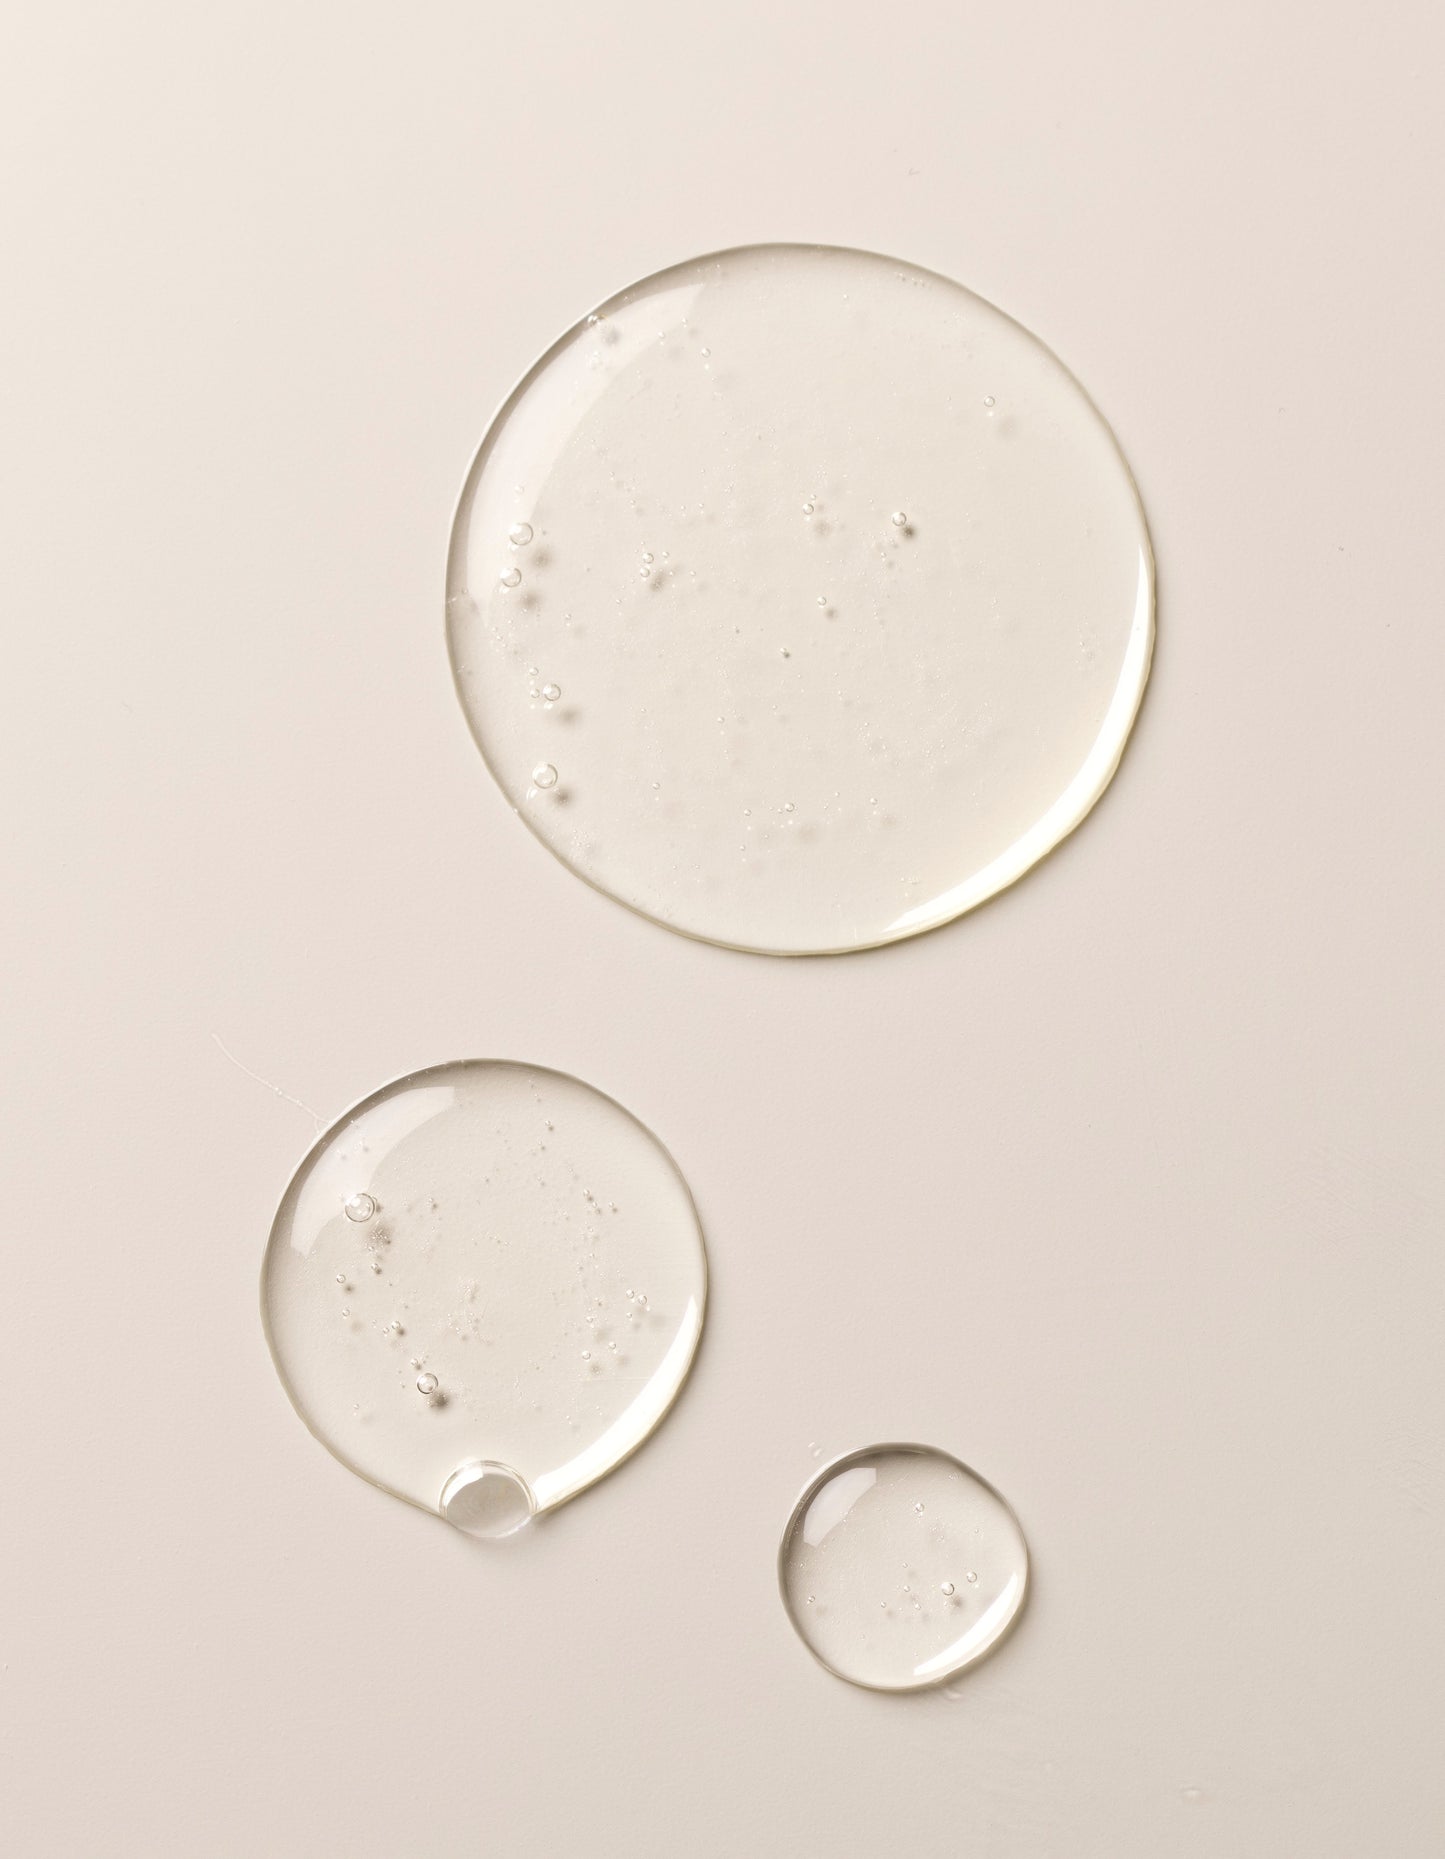 Fount Oil Cleanser droplets